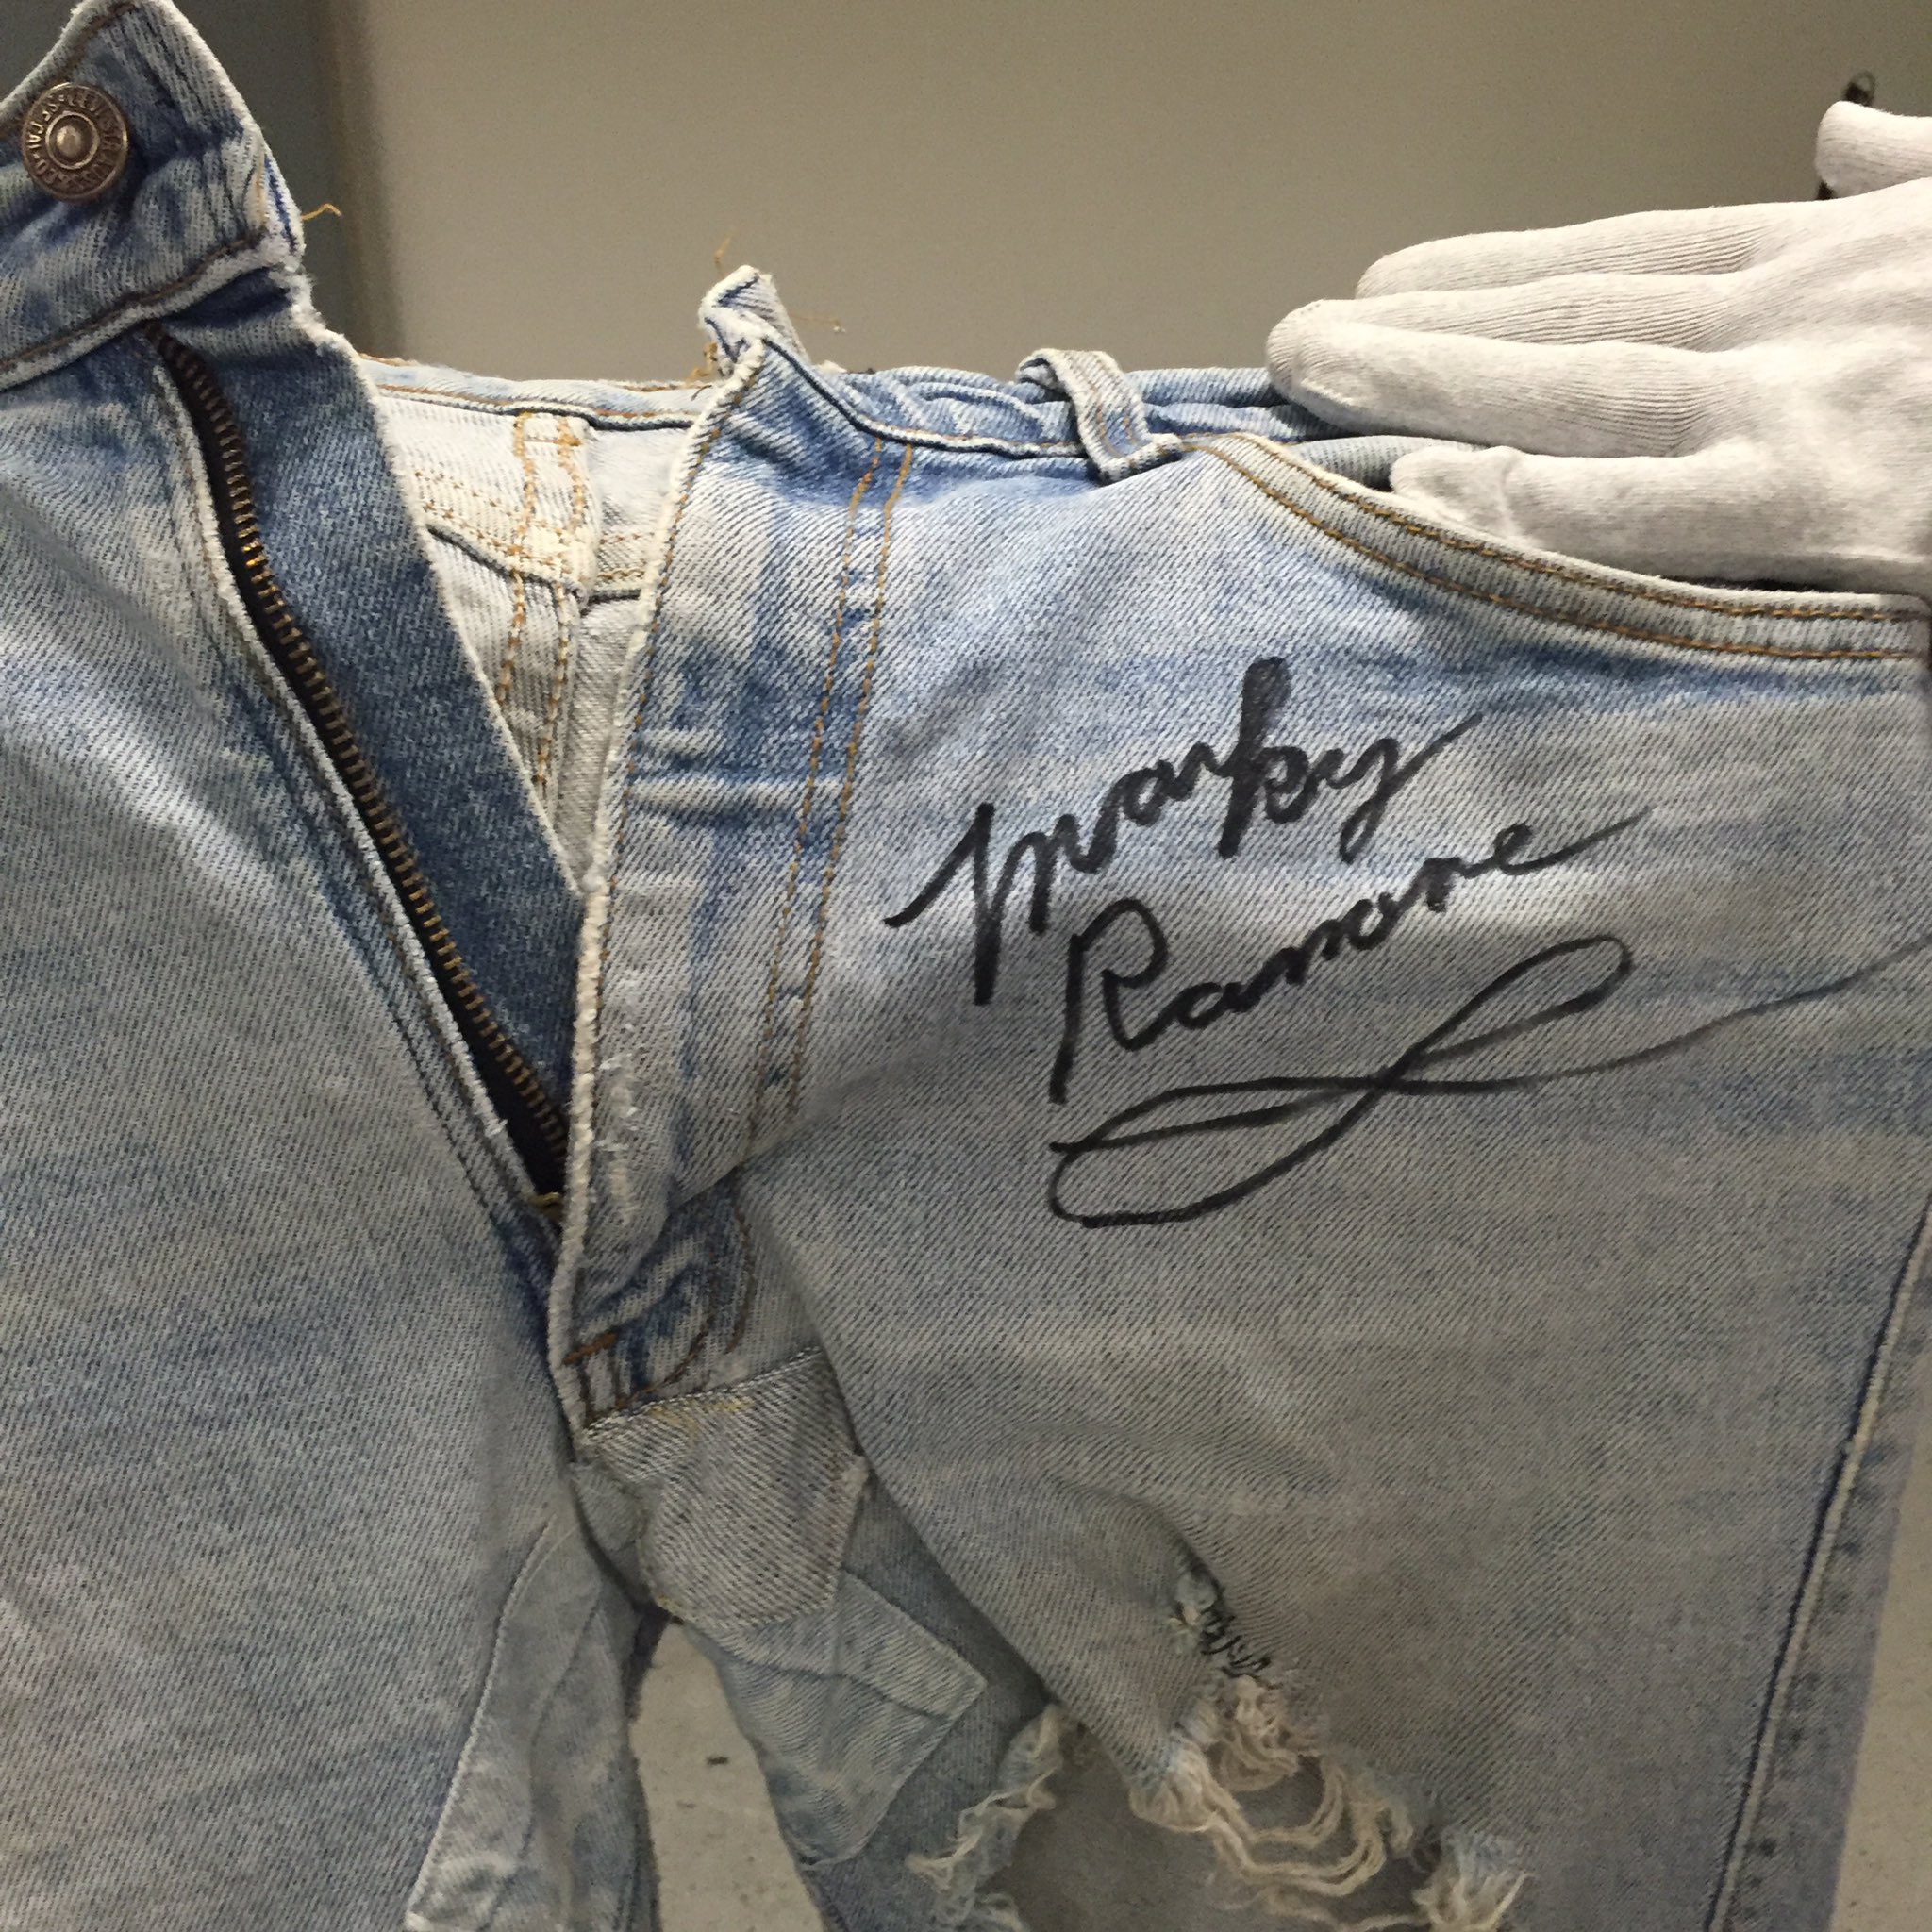 Tracey Panek on X: "Check out the tears in Marky #Ramones #505 @LEVIS jeans.  Thanks for the glimpse into your #archives @rock_hall!  https://t.co/bJqkchggfj" / X